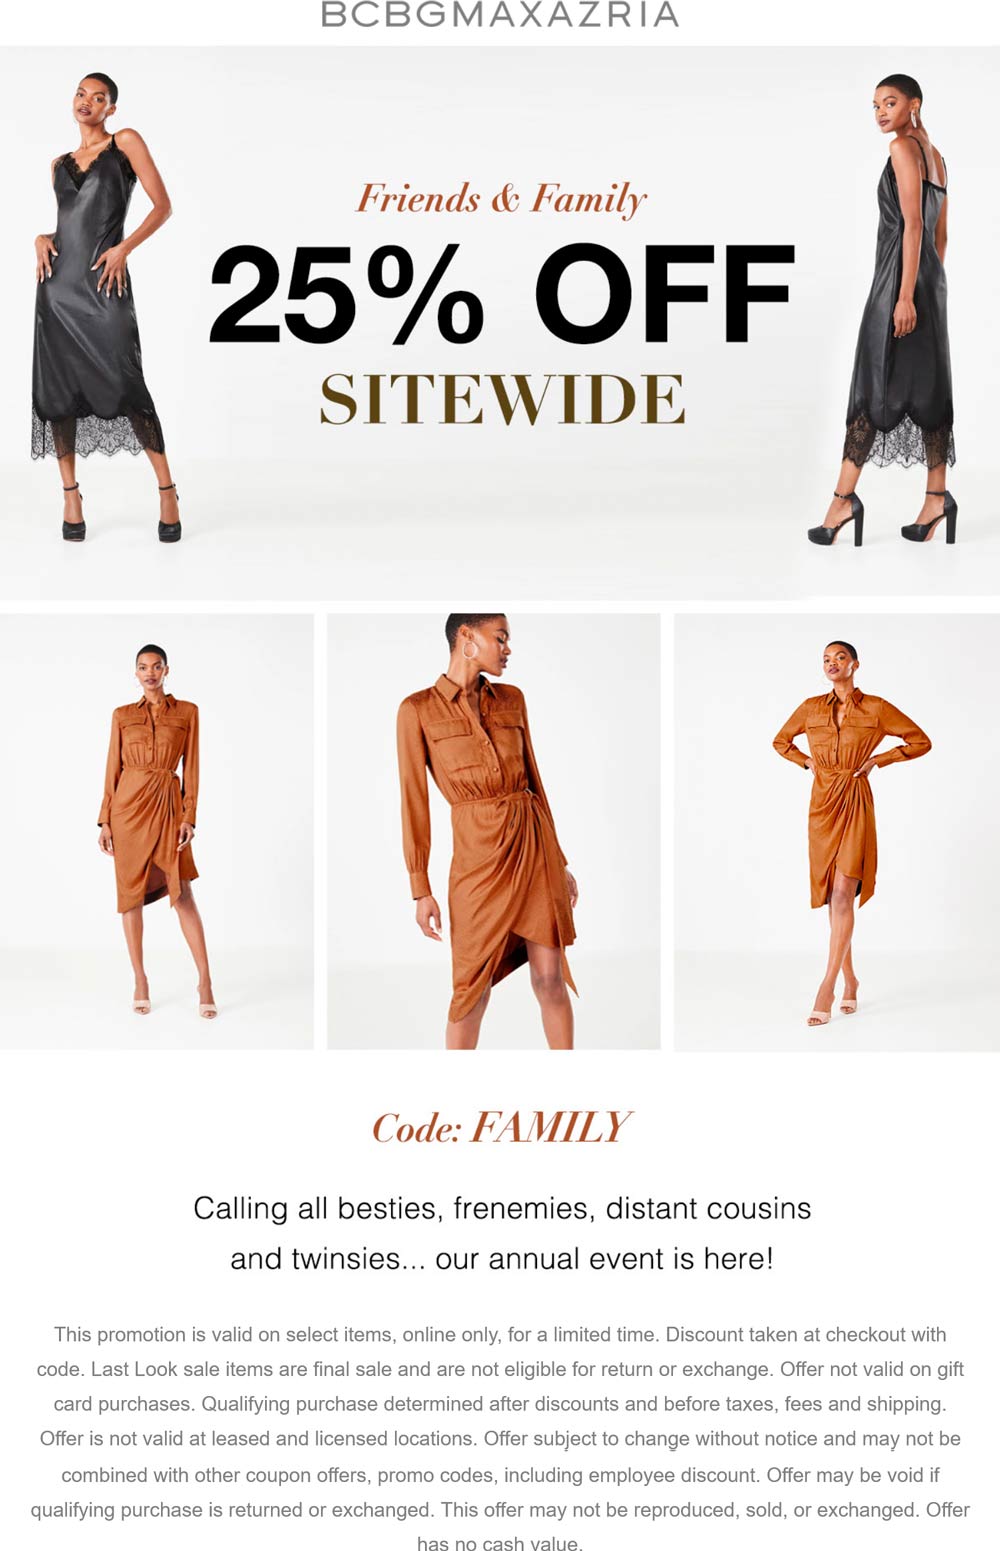 BCBGMAXAZRIA stores Coupon  25% off everything at BCBGMAXAZRIA via promo code FAMILY #bcbgmaxazria 